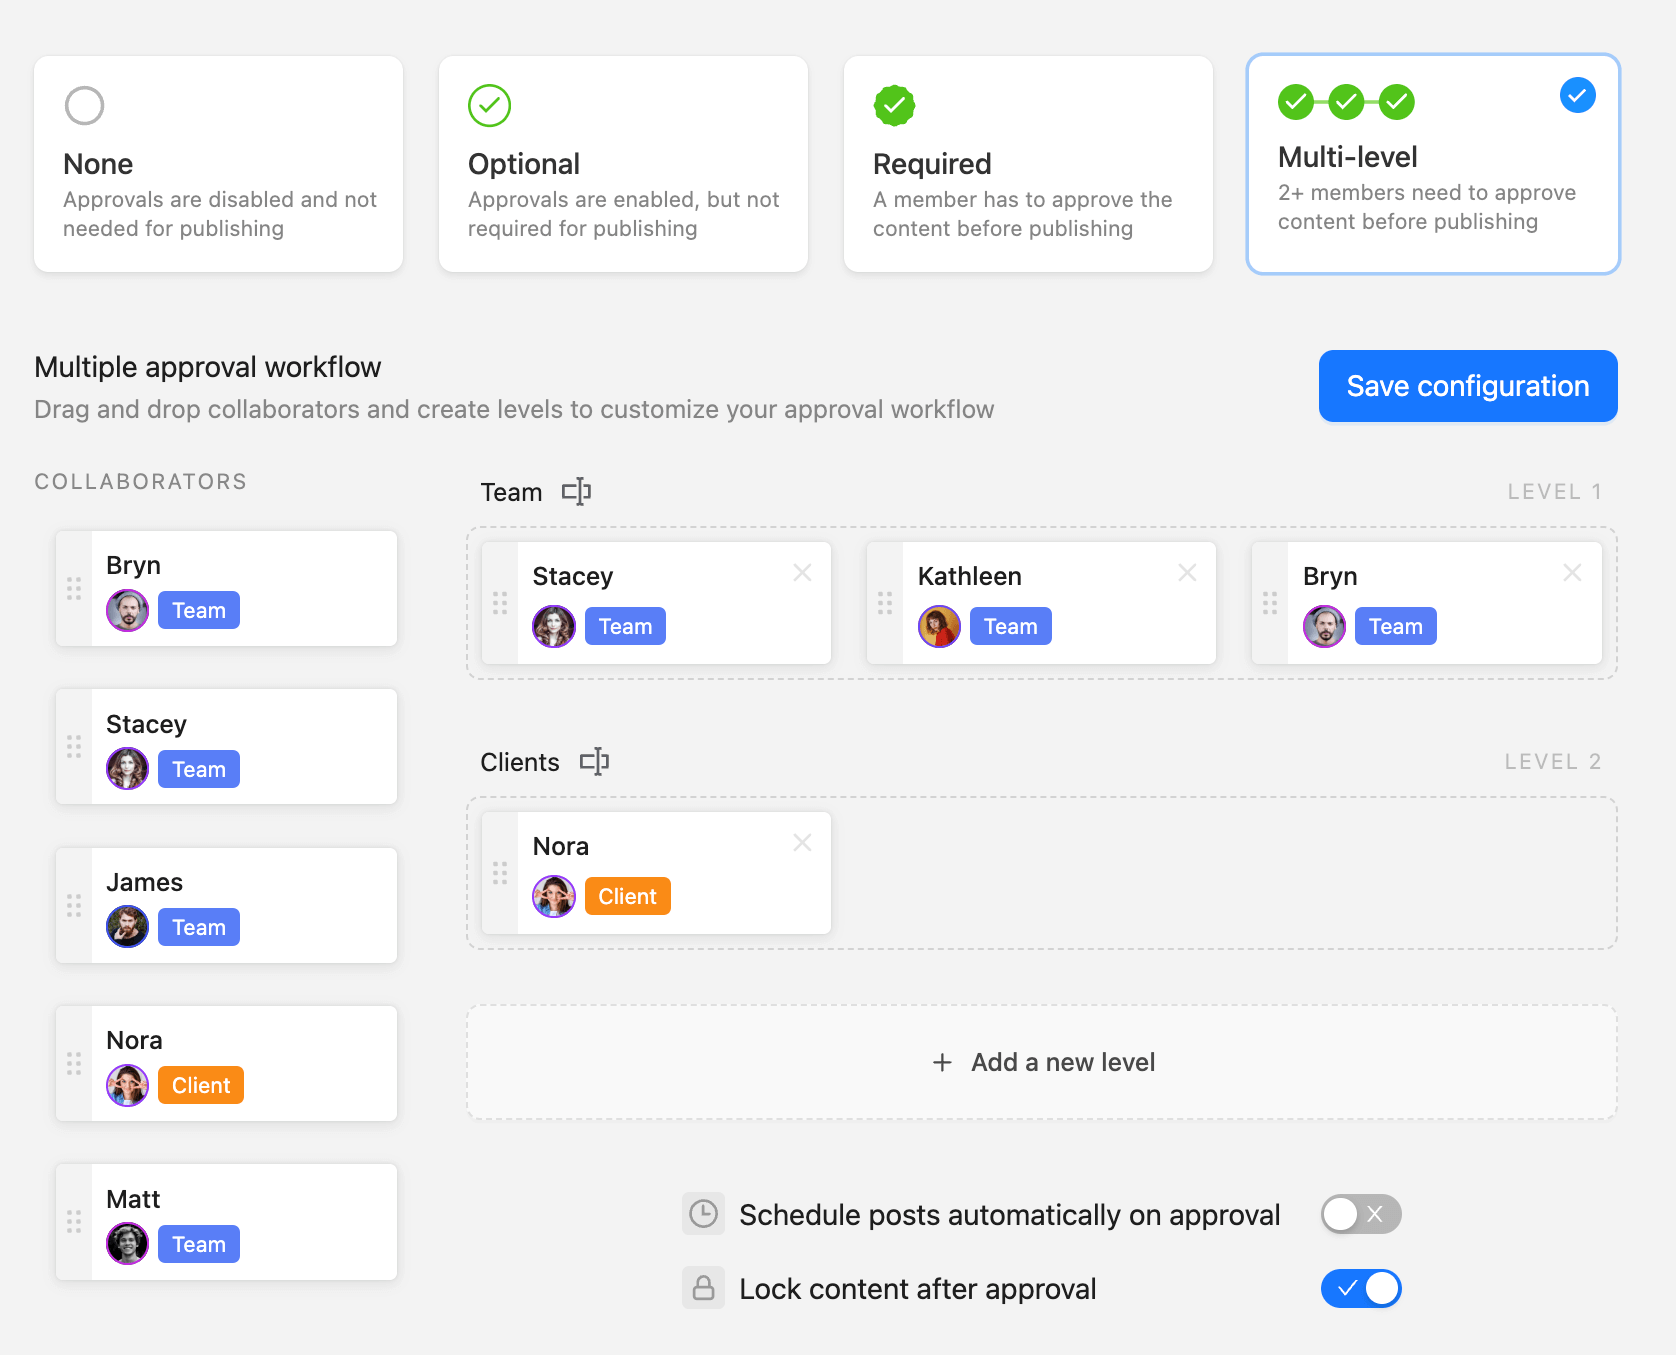 Approval workflow settings showing team and client collaborators organized into multiple approval levels, with options for scheduling and locking content.